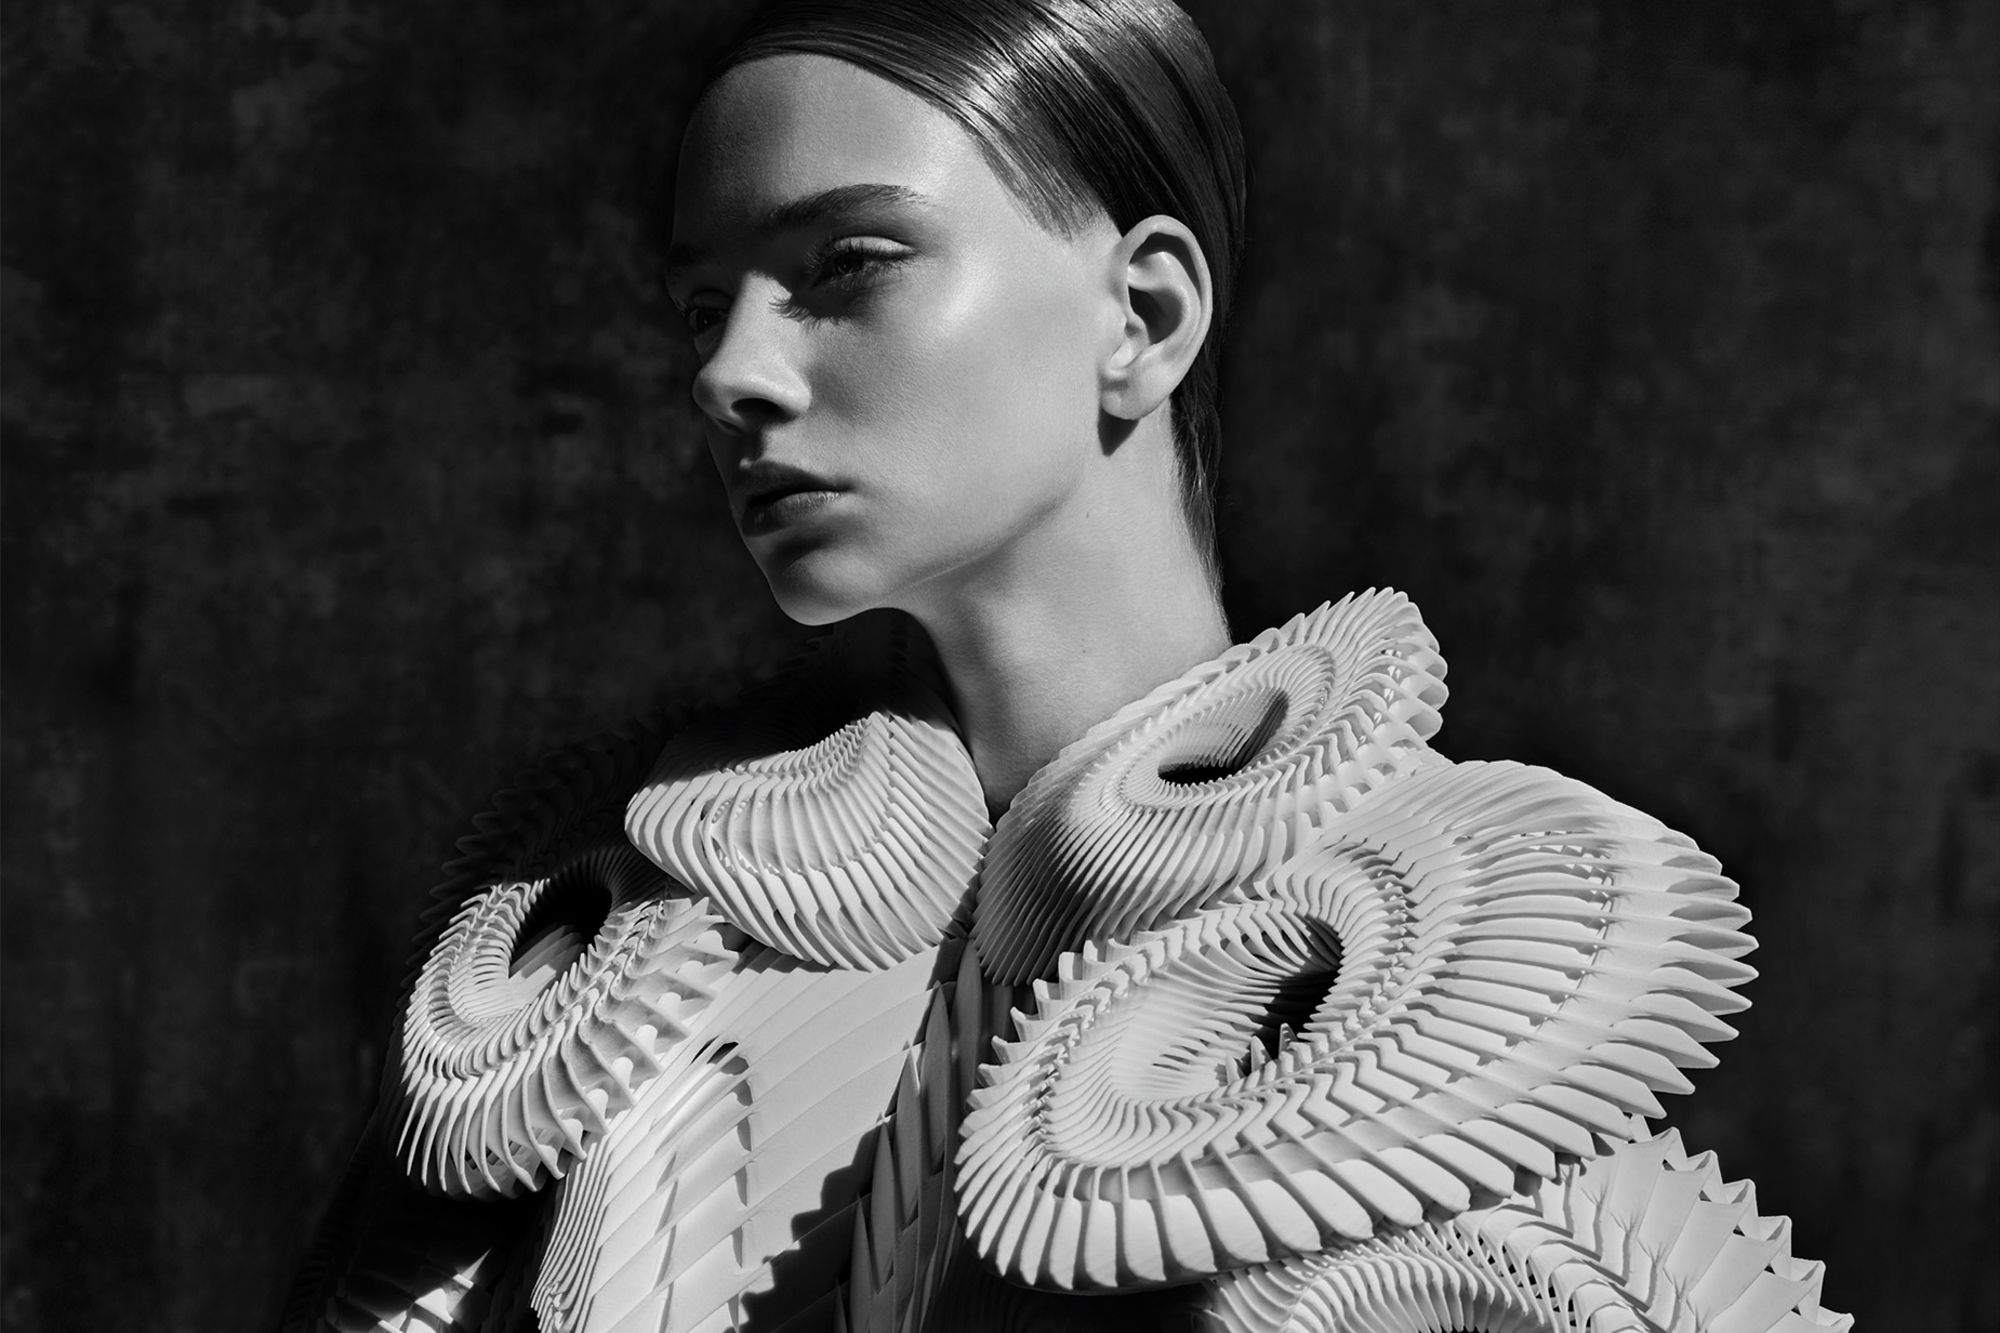 Iris van Herpen uses unconventional materials to make pieces inspired by fossils, astronomy, skeletons and the natural world.